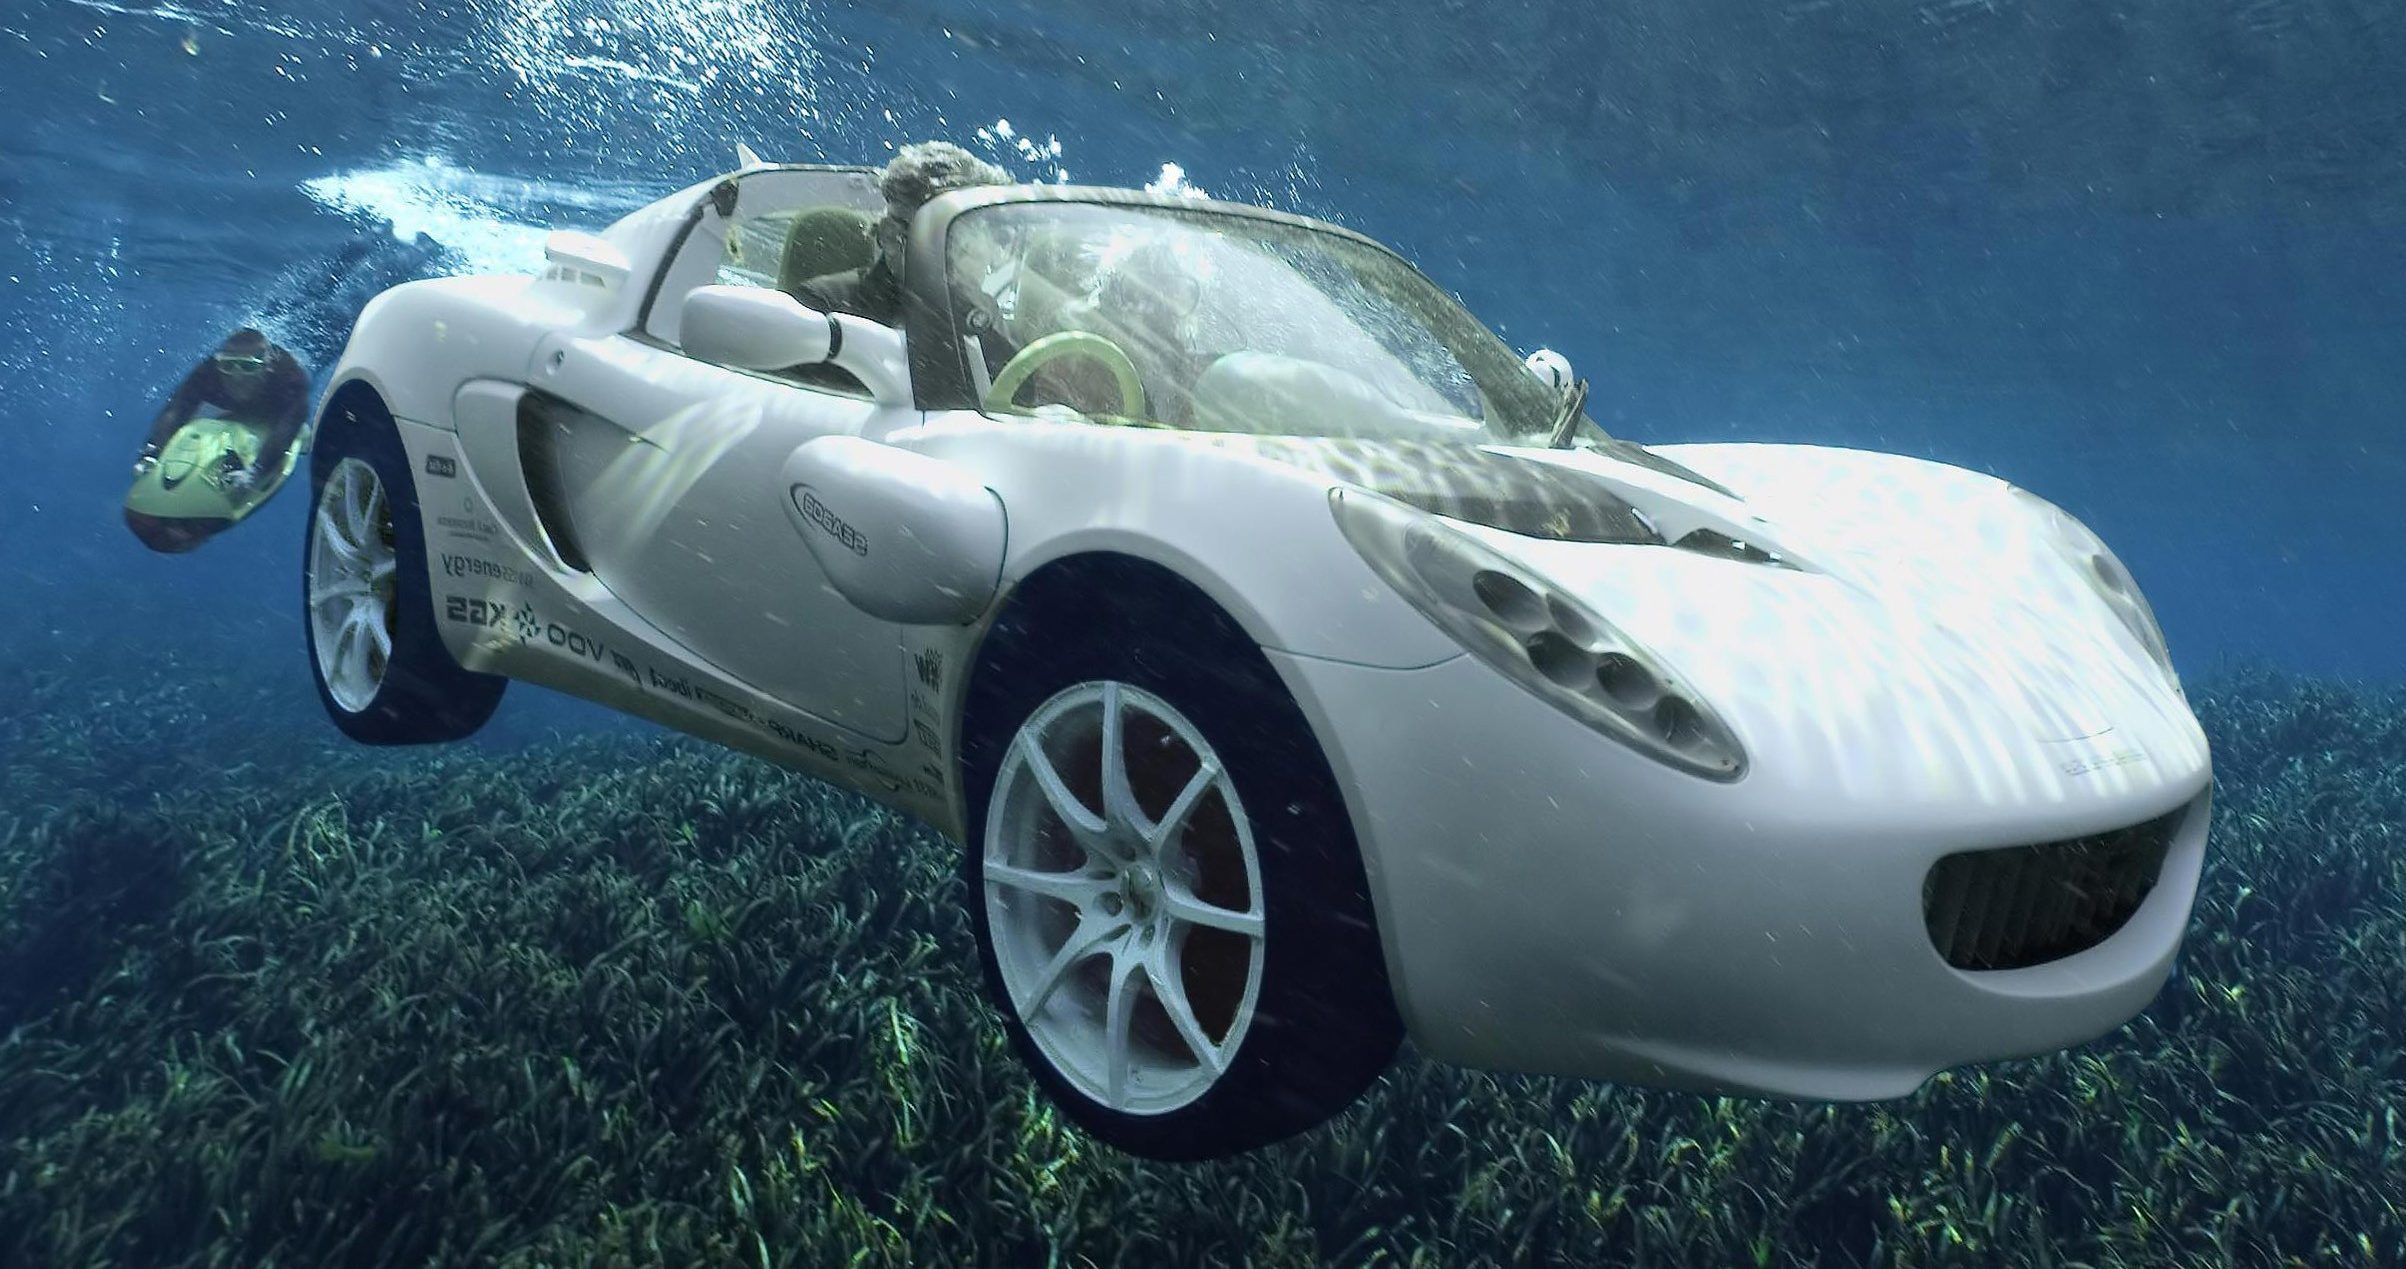 The 10 Best Amphibious Cars Of All Time, Ranked